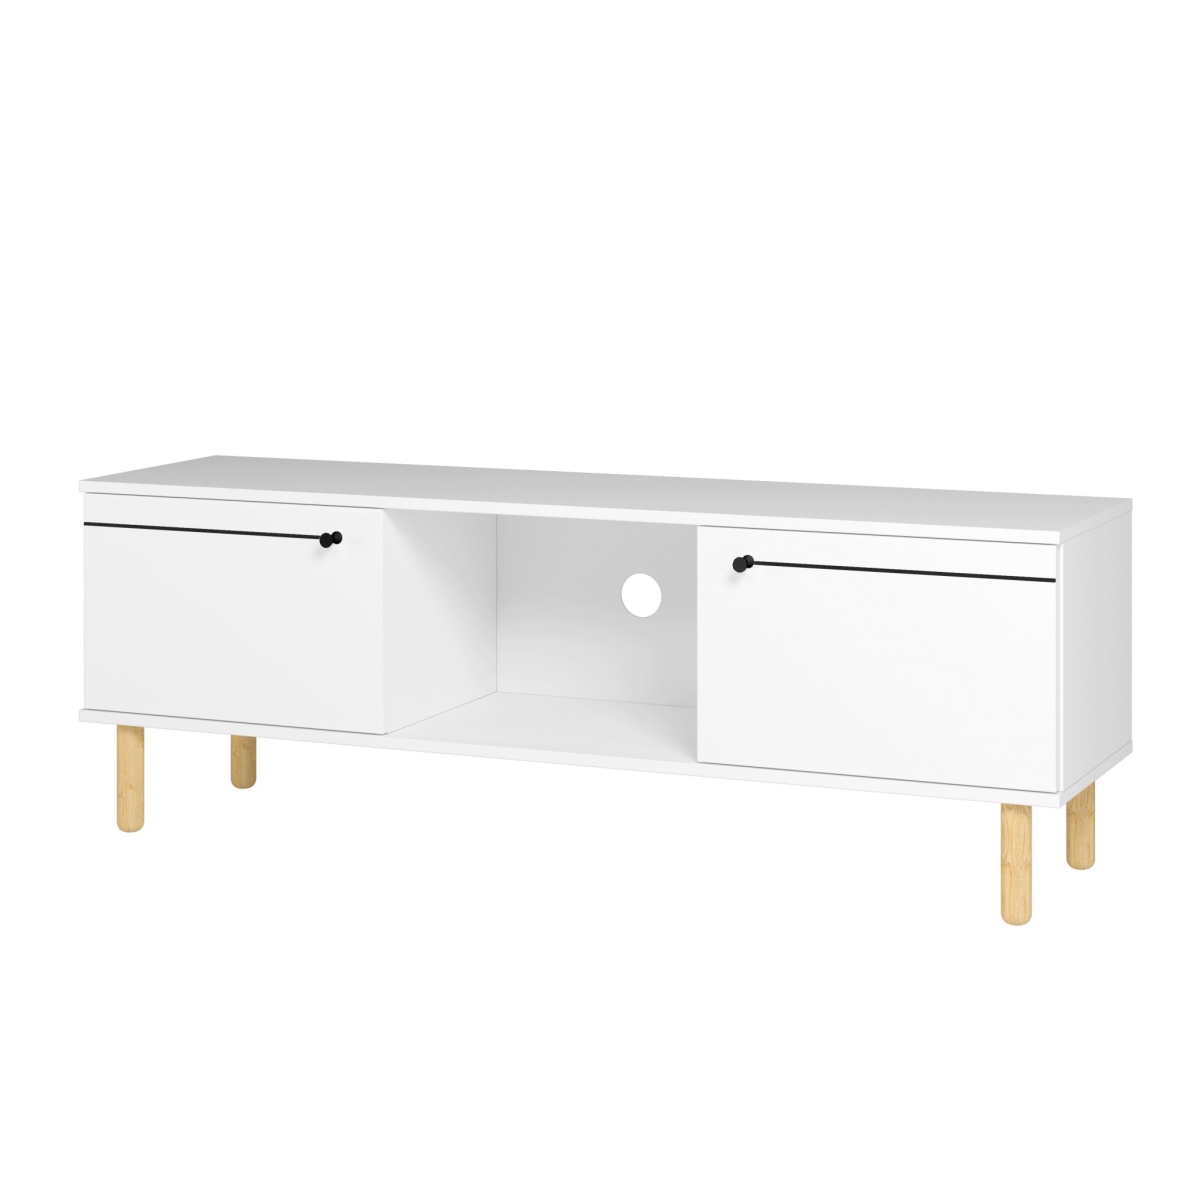 Picture of HomeRoots 403104 Iko White Modern TV Stand Media Center with Cabinets